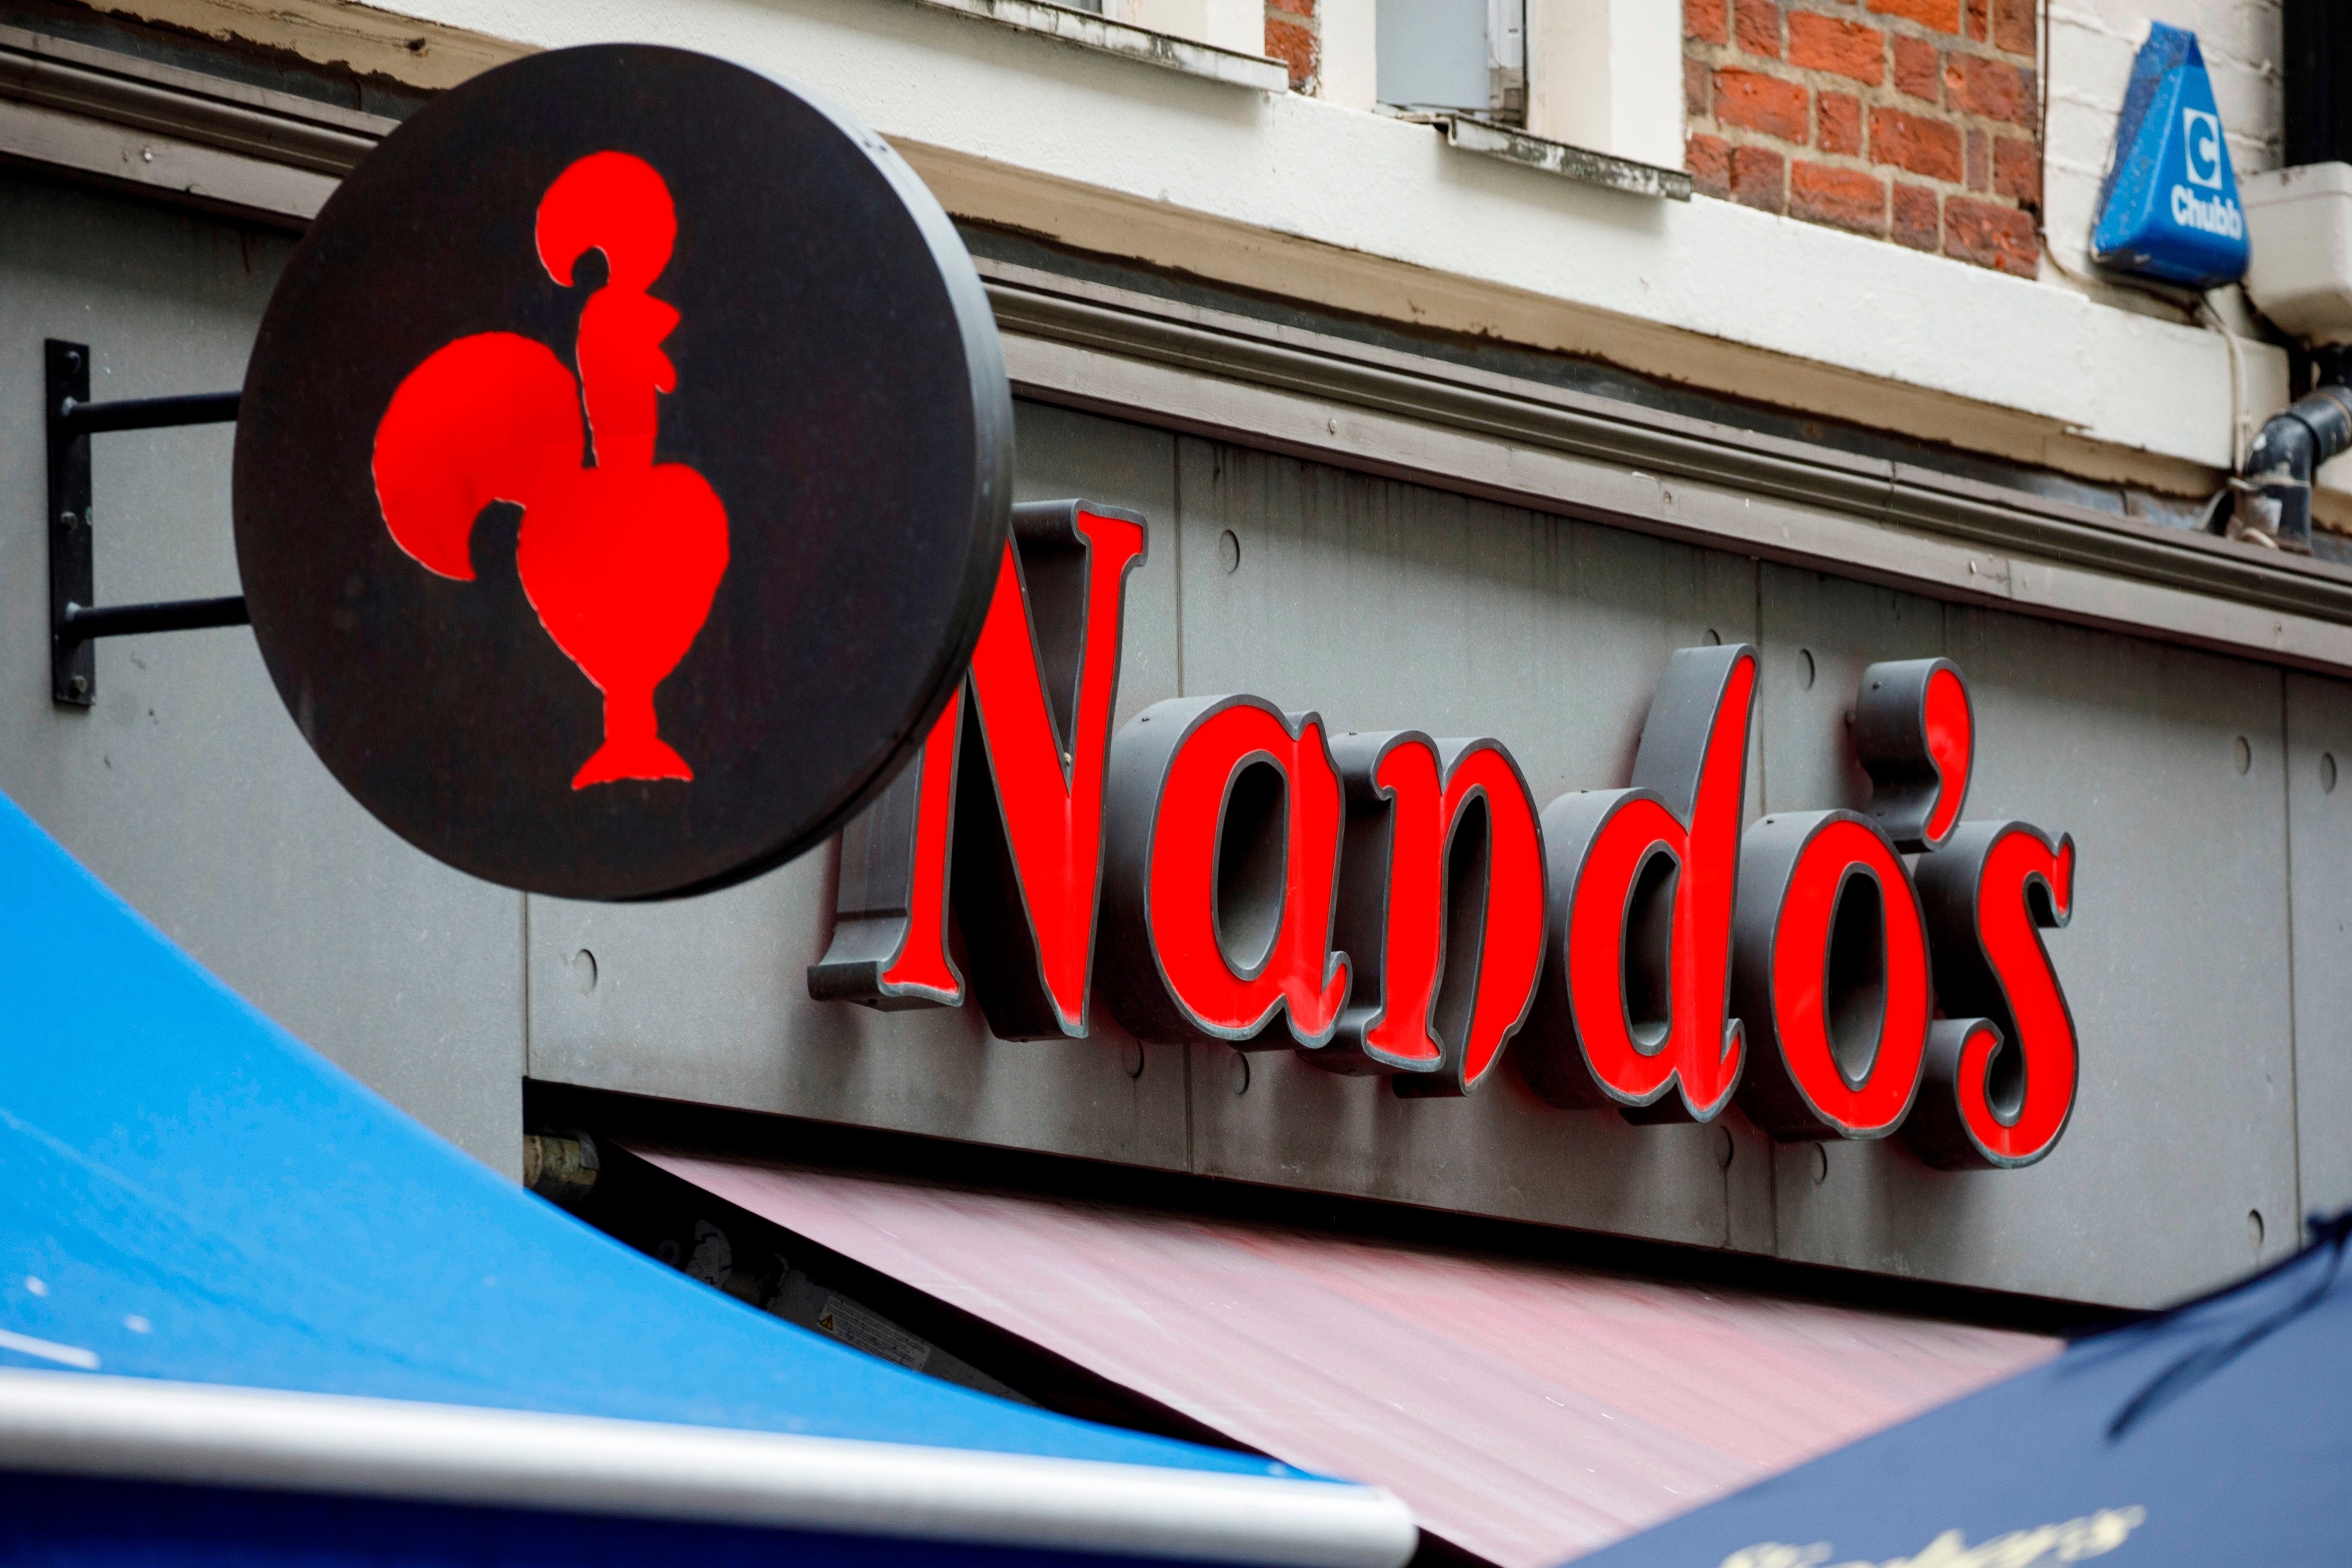 Nando’s said it hoped its restaurants would be trading again by Saturday